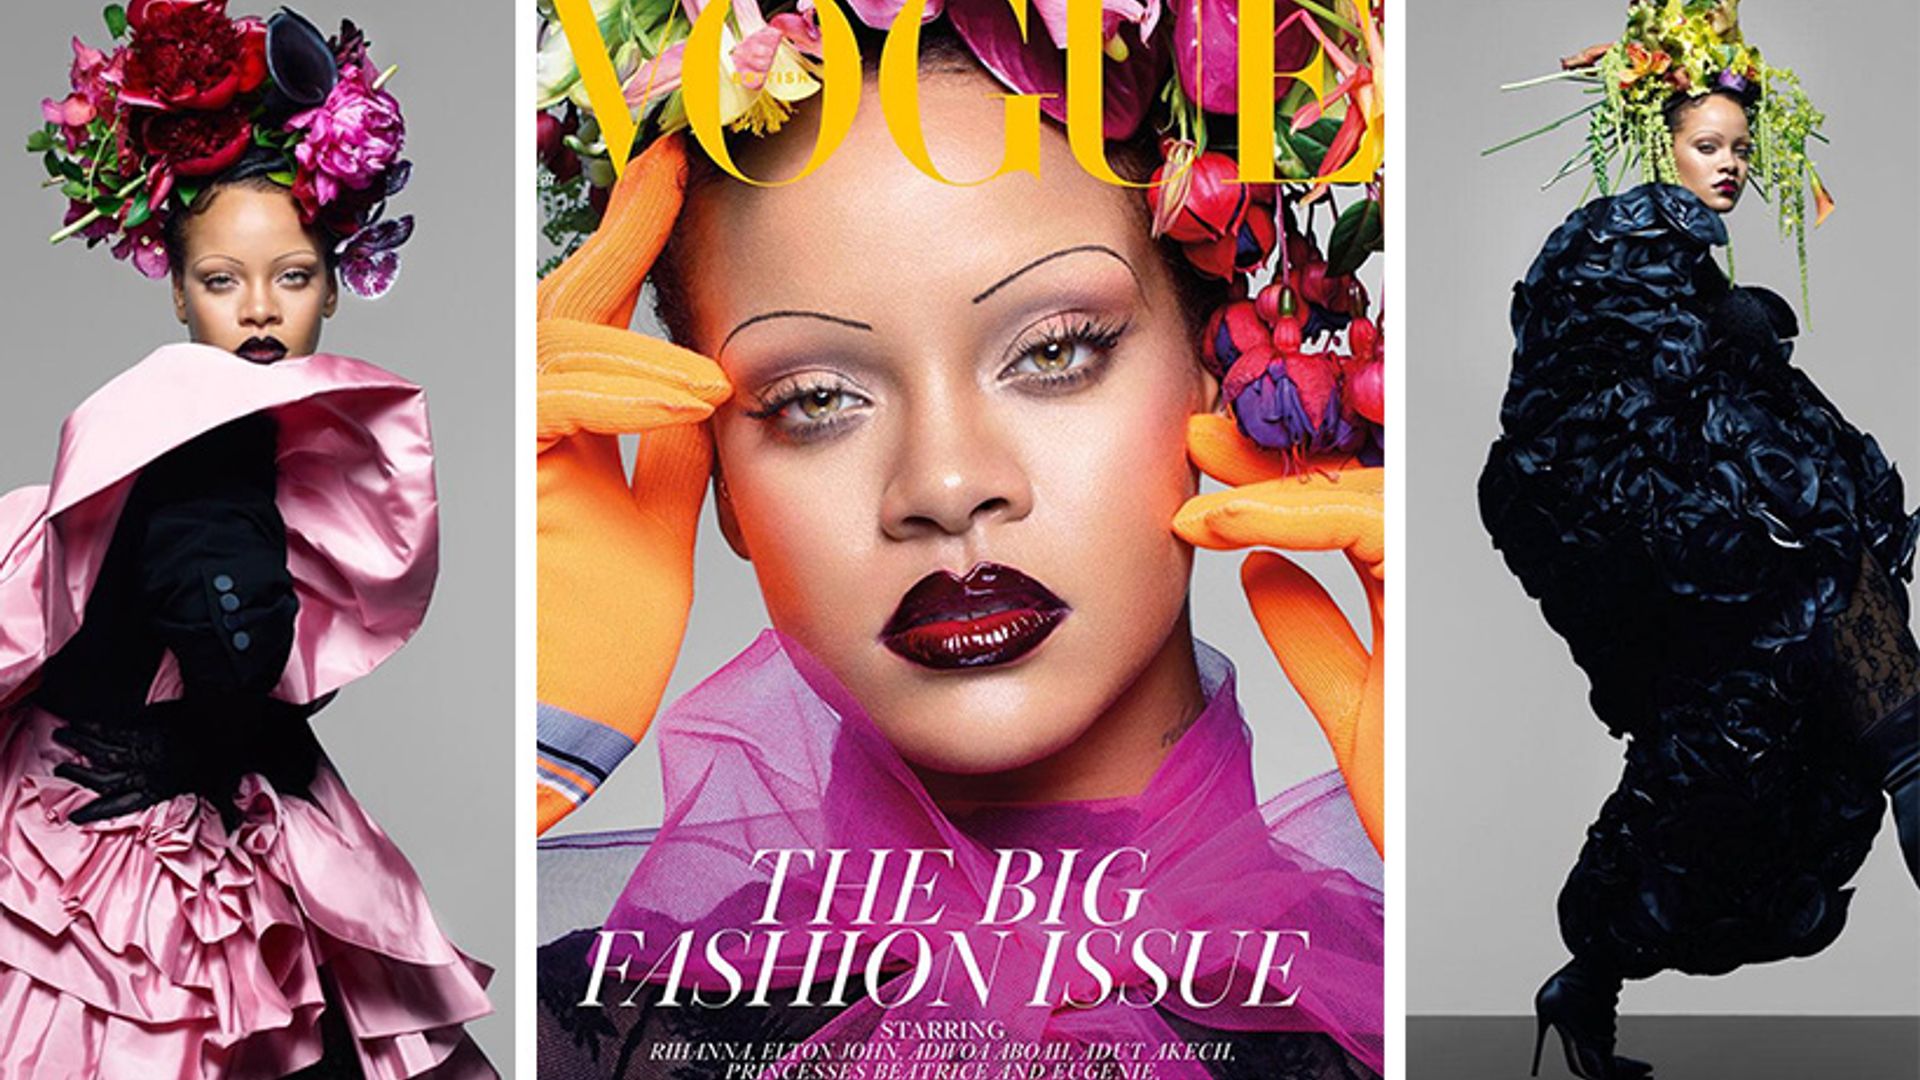 Rihanna's Vogue cover shoot is amazing (but please don't let those skinny eyebrows come back in fashion)